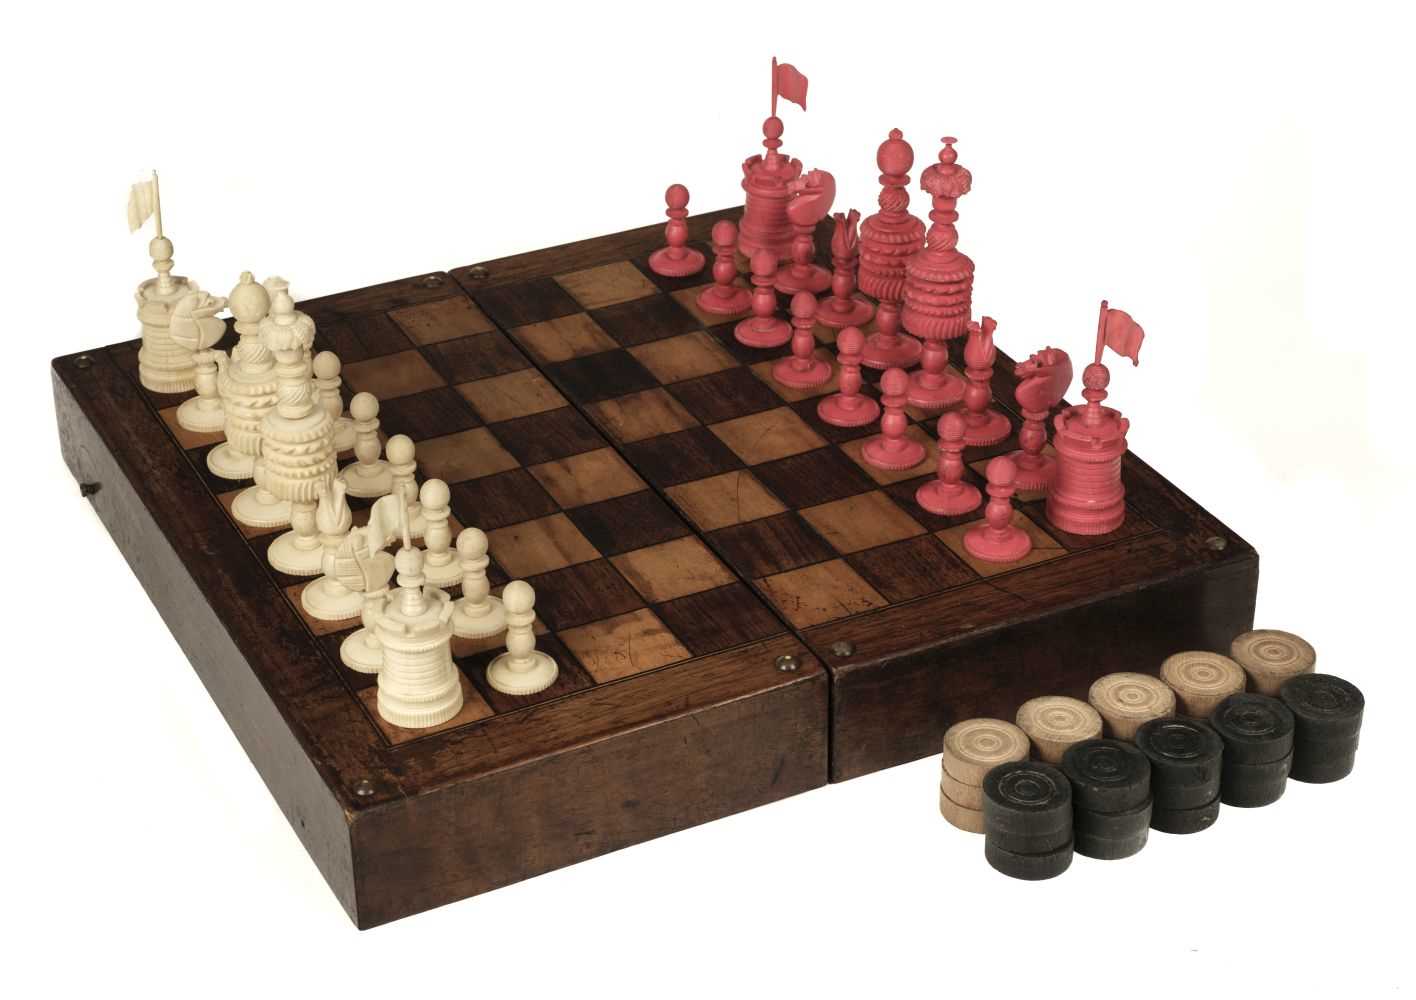 Lot 247 - Chess. A 19th-century English bone chess set carved in the "Barleycorn" pattern